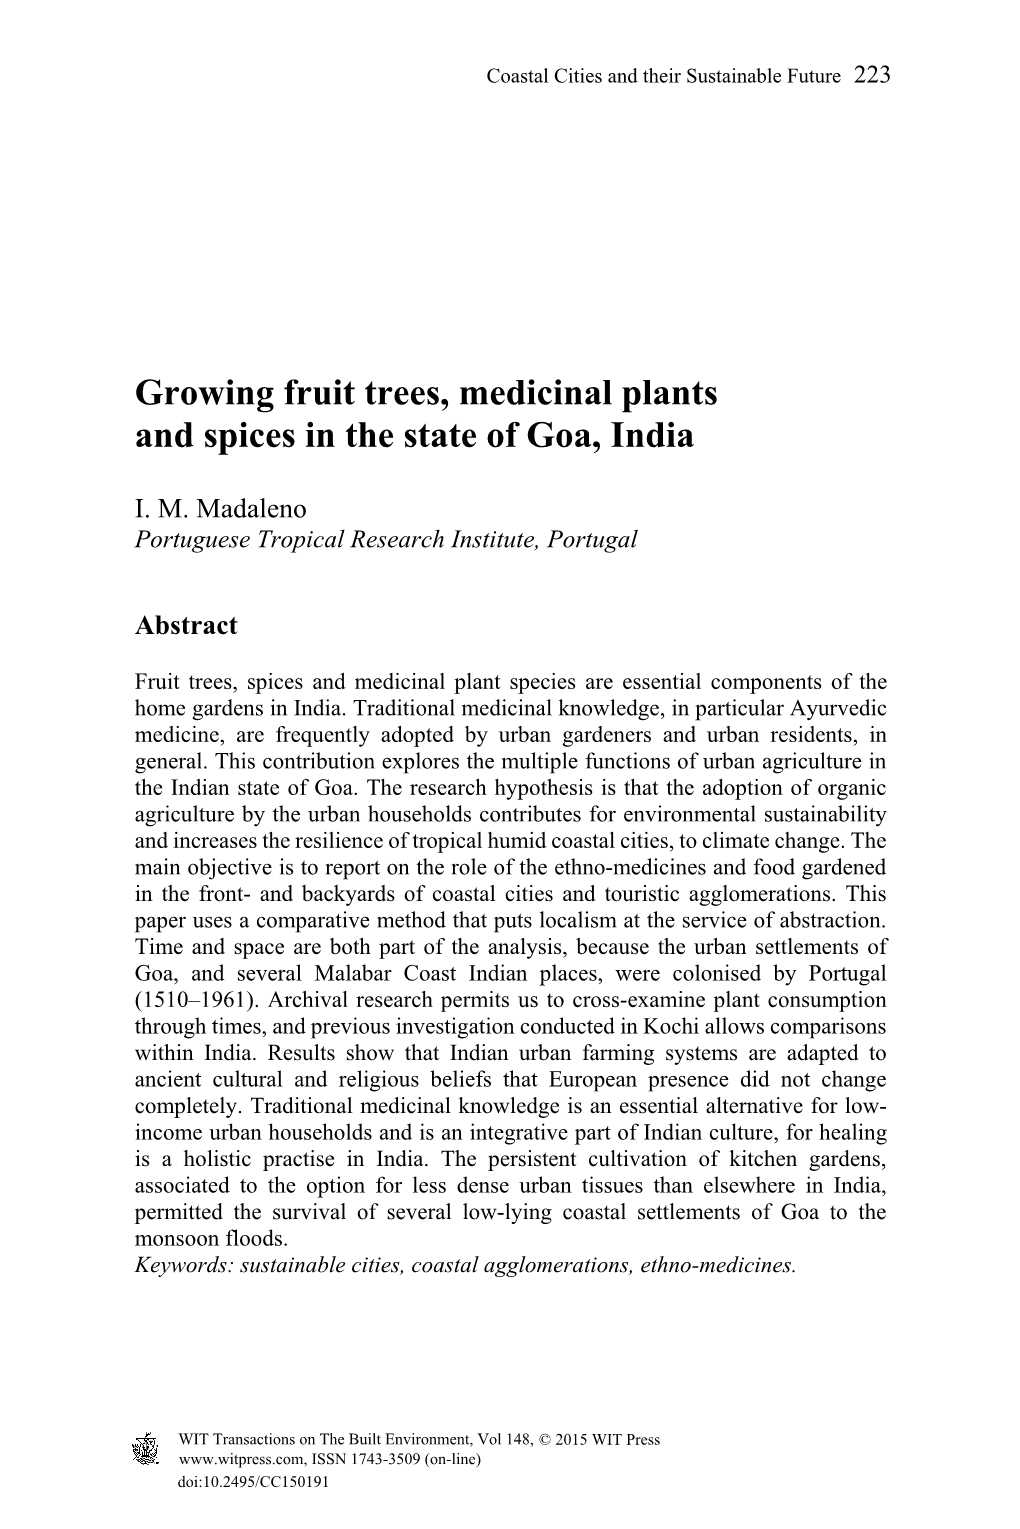 Growing Fruit Trees, Medicinal Plants and Spices in the State of Goa, India